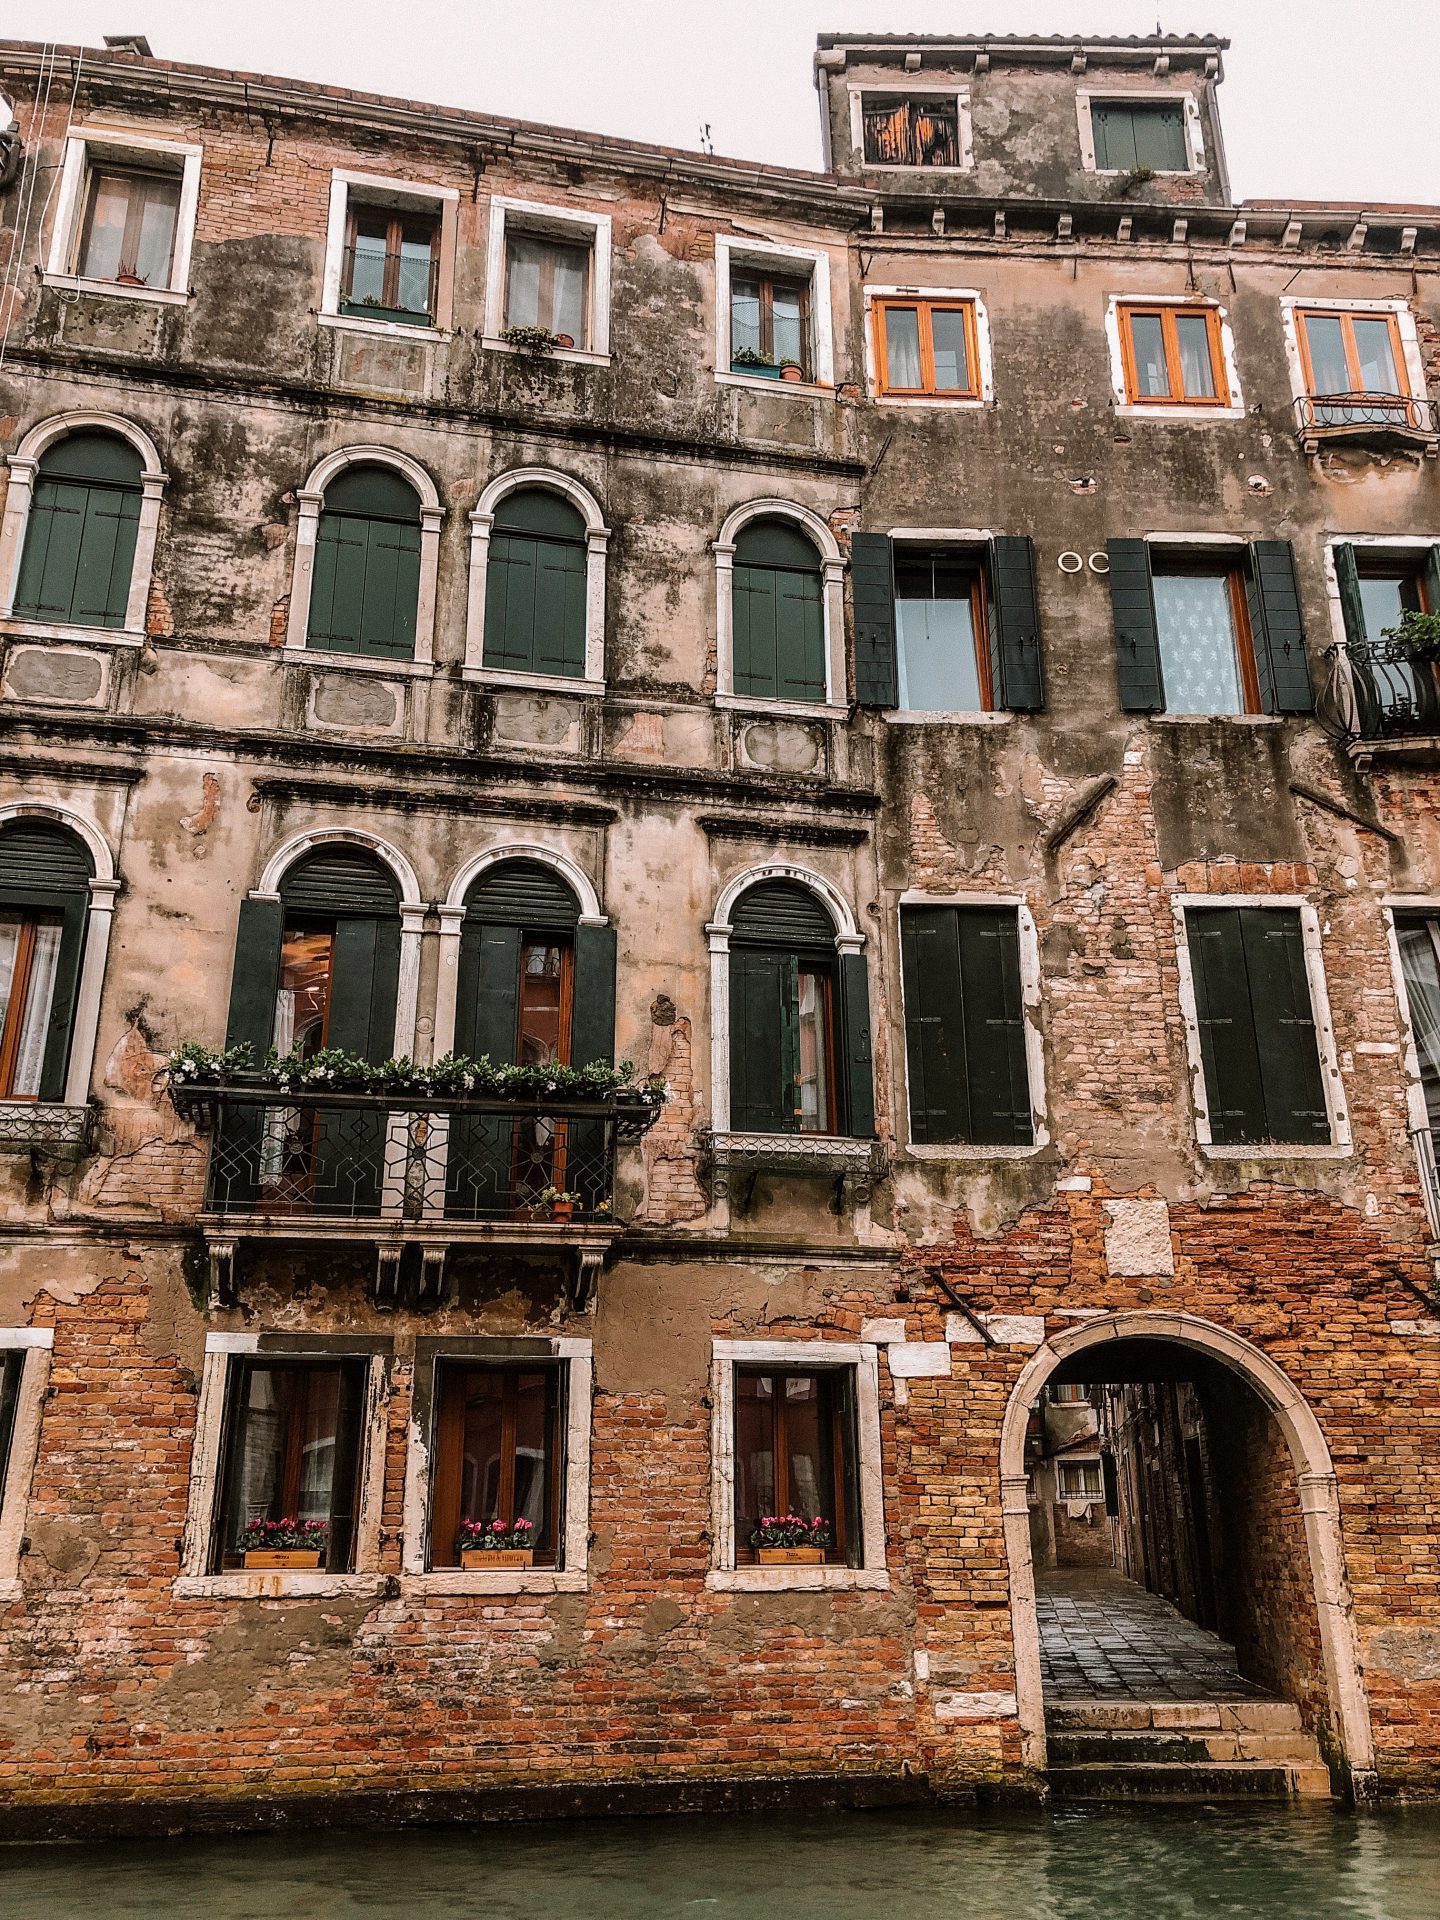 Houses on the canal in Venice, Italy